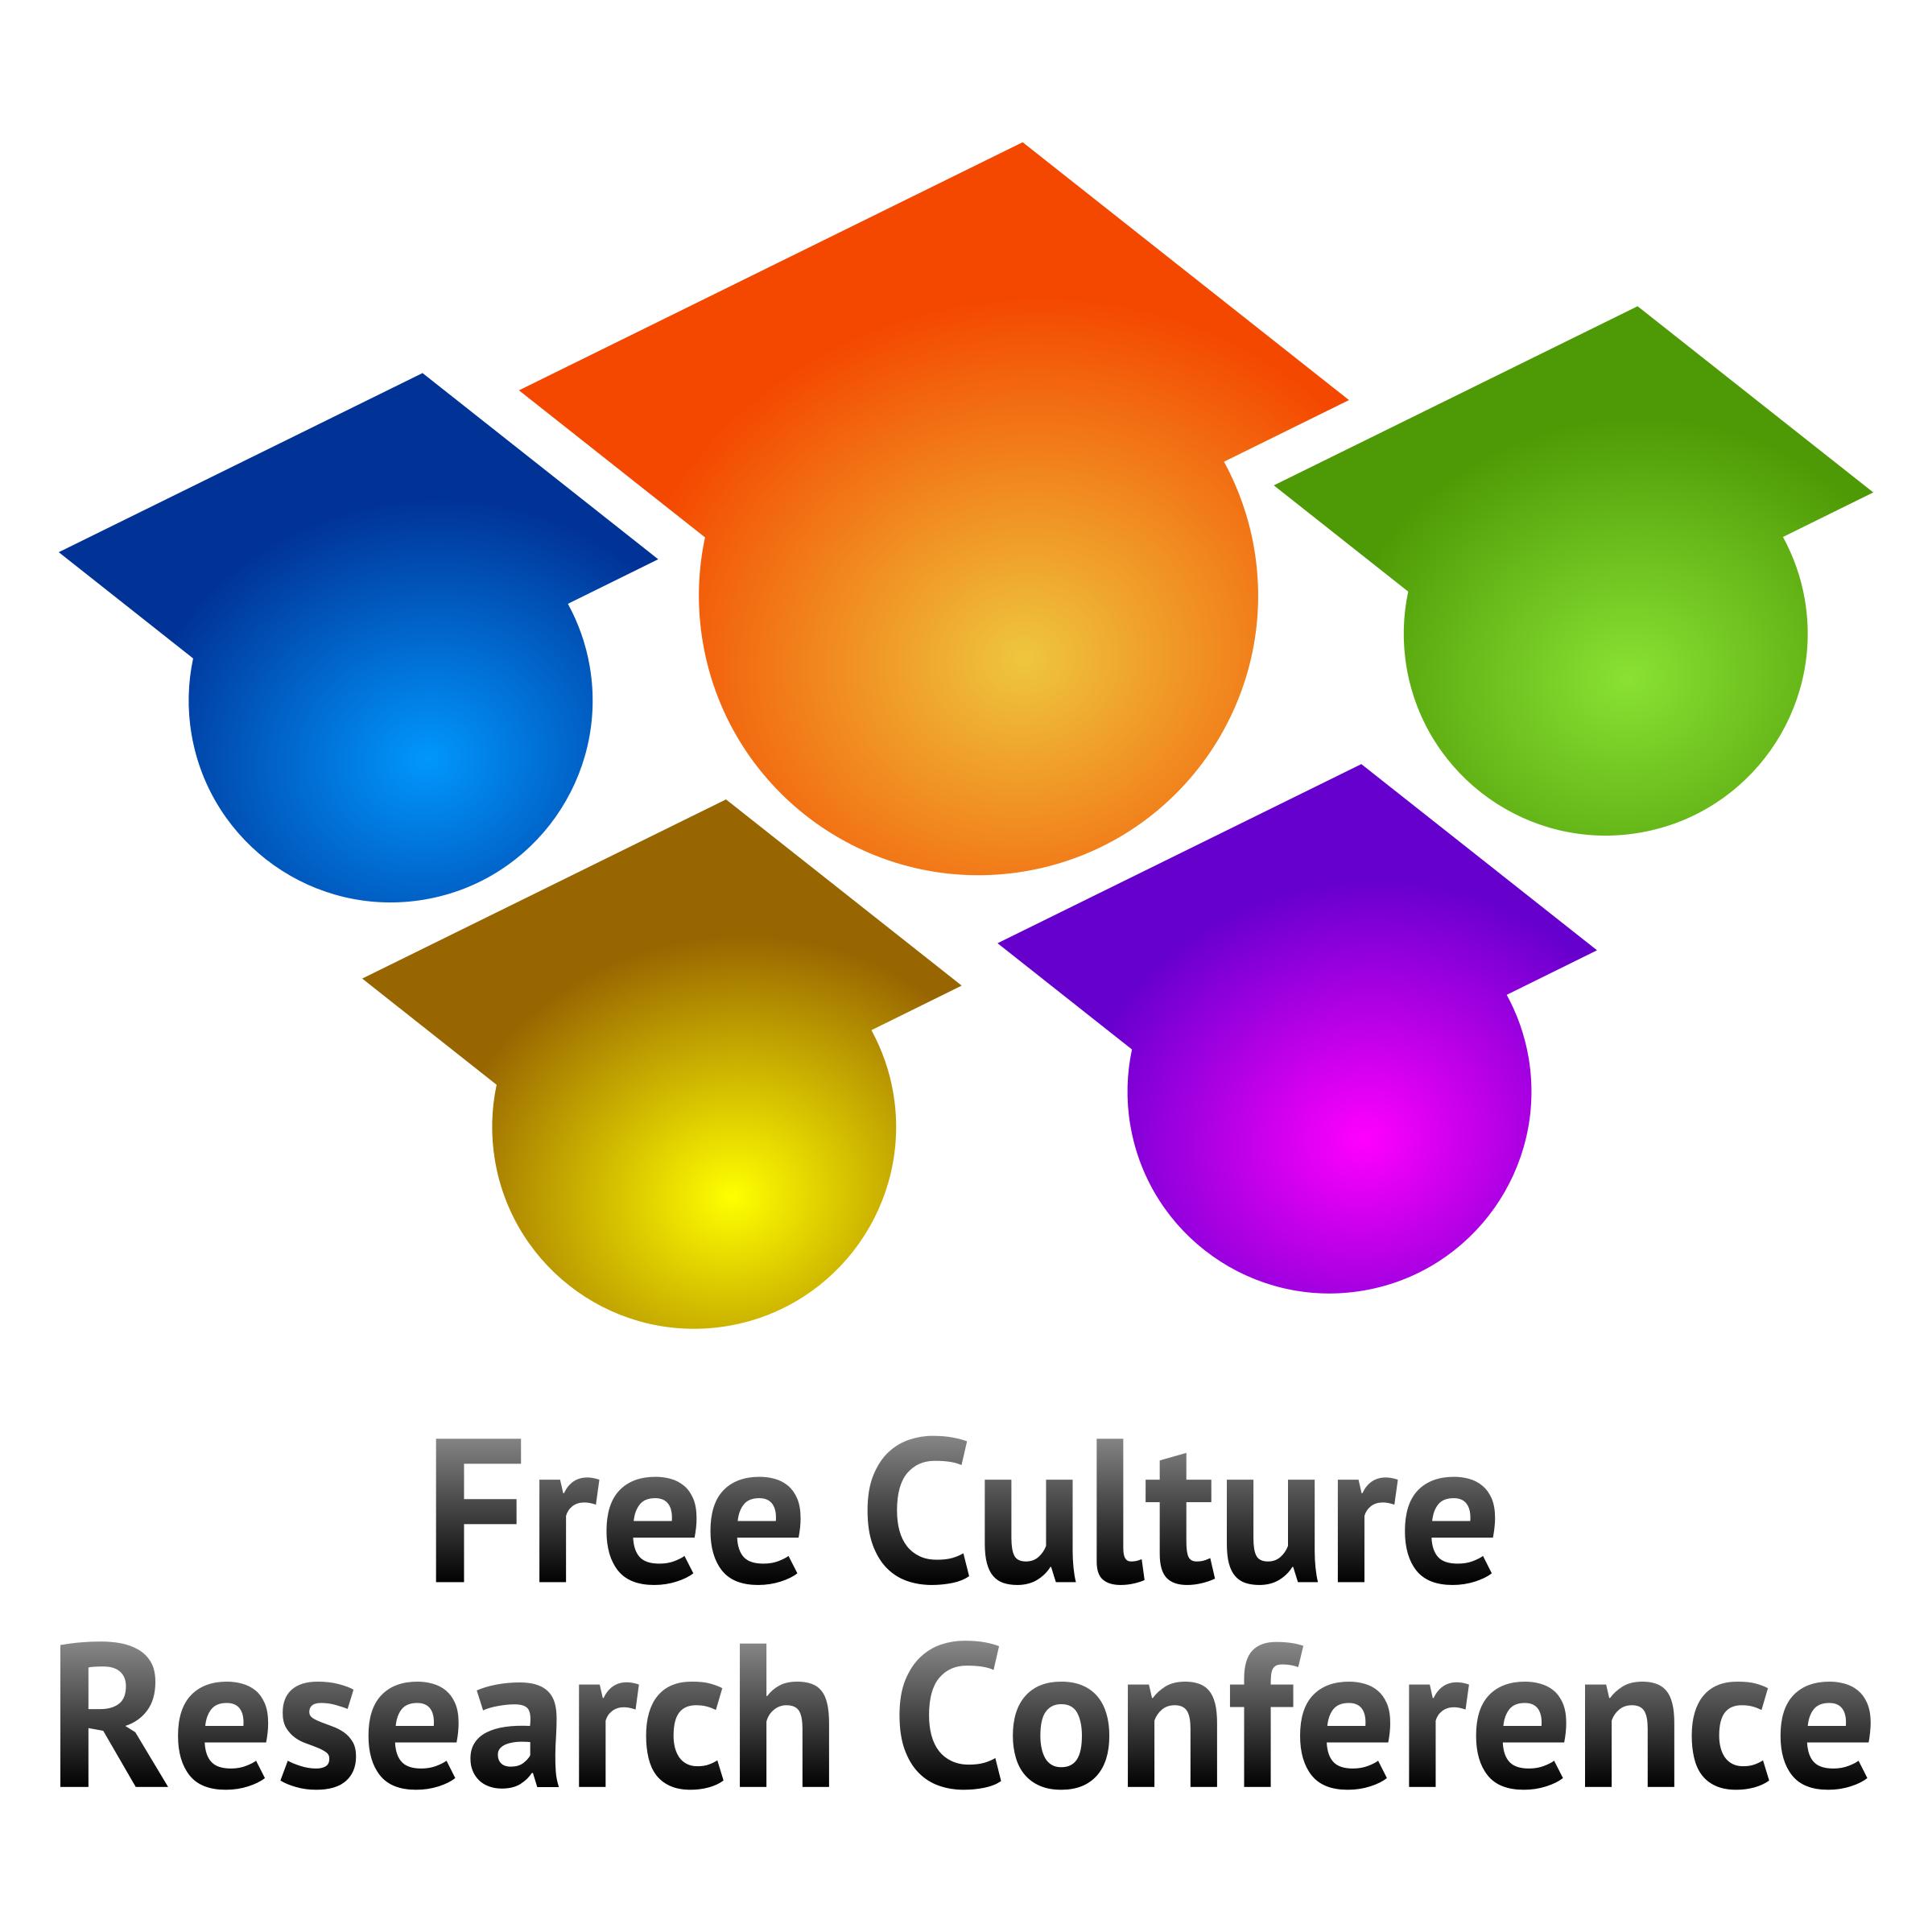 Free Culture Research Conference logo V3 icons